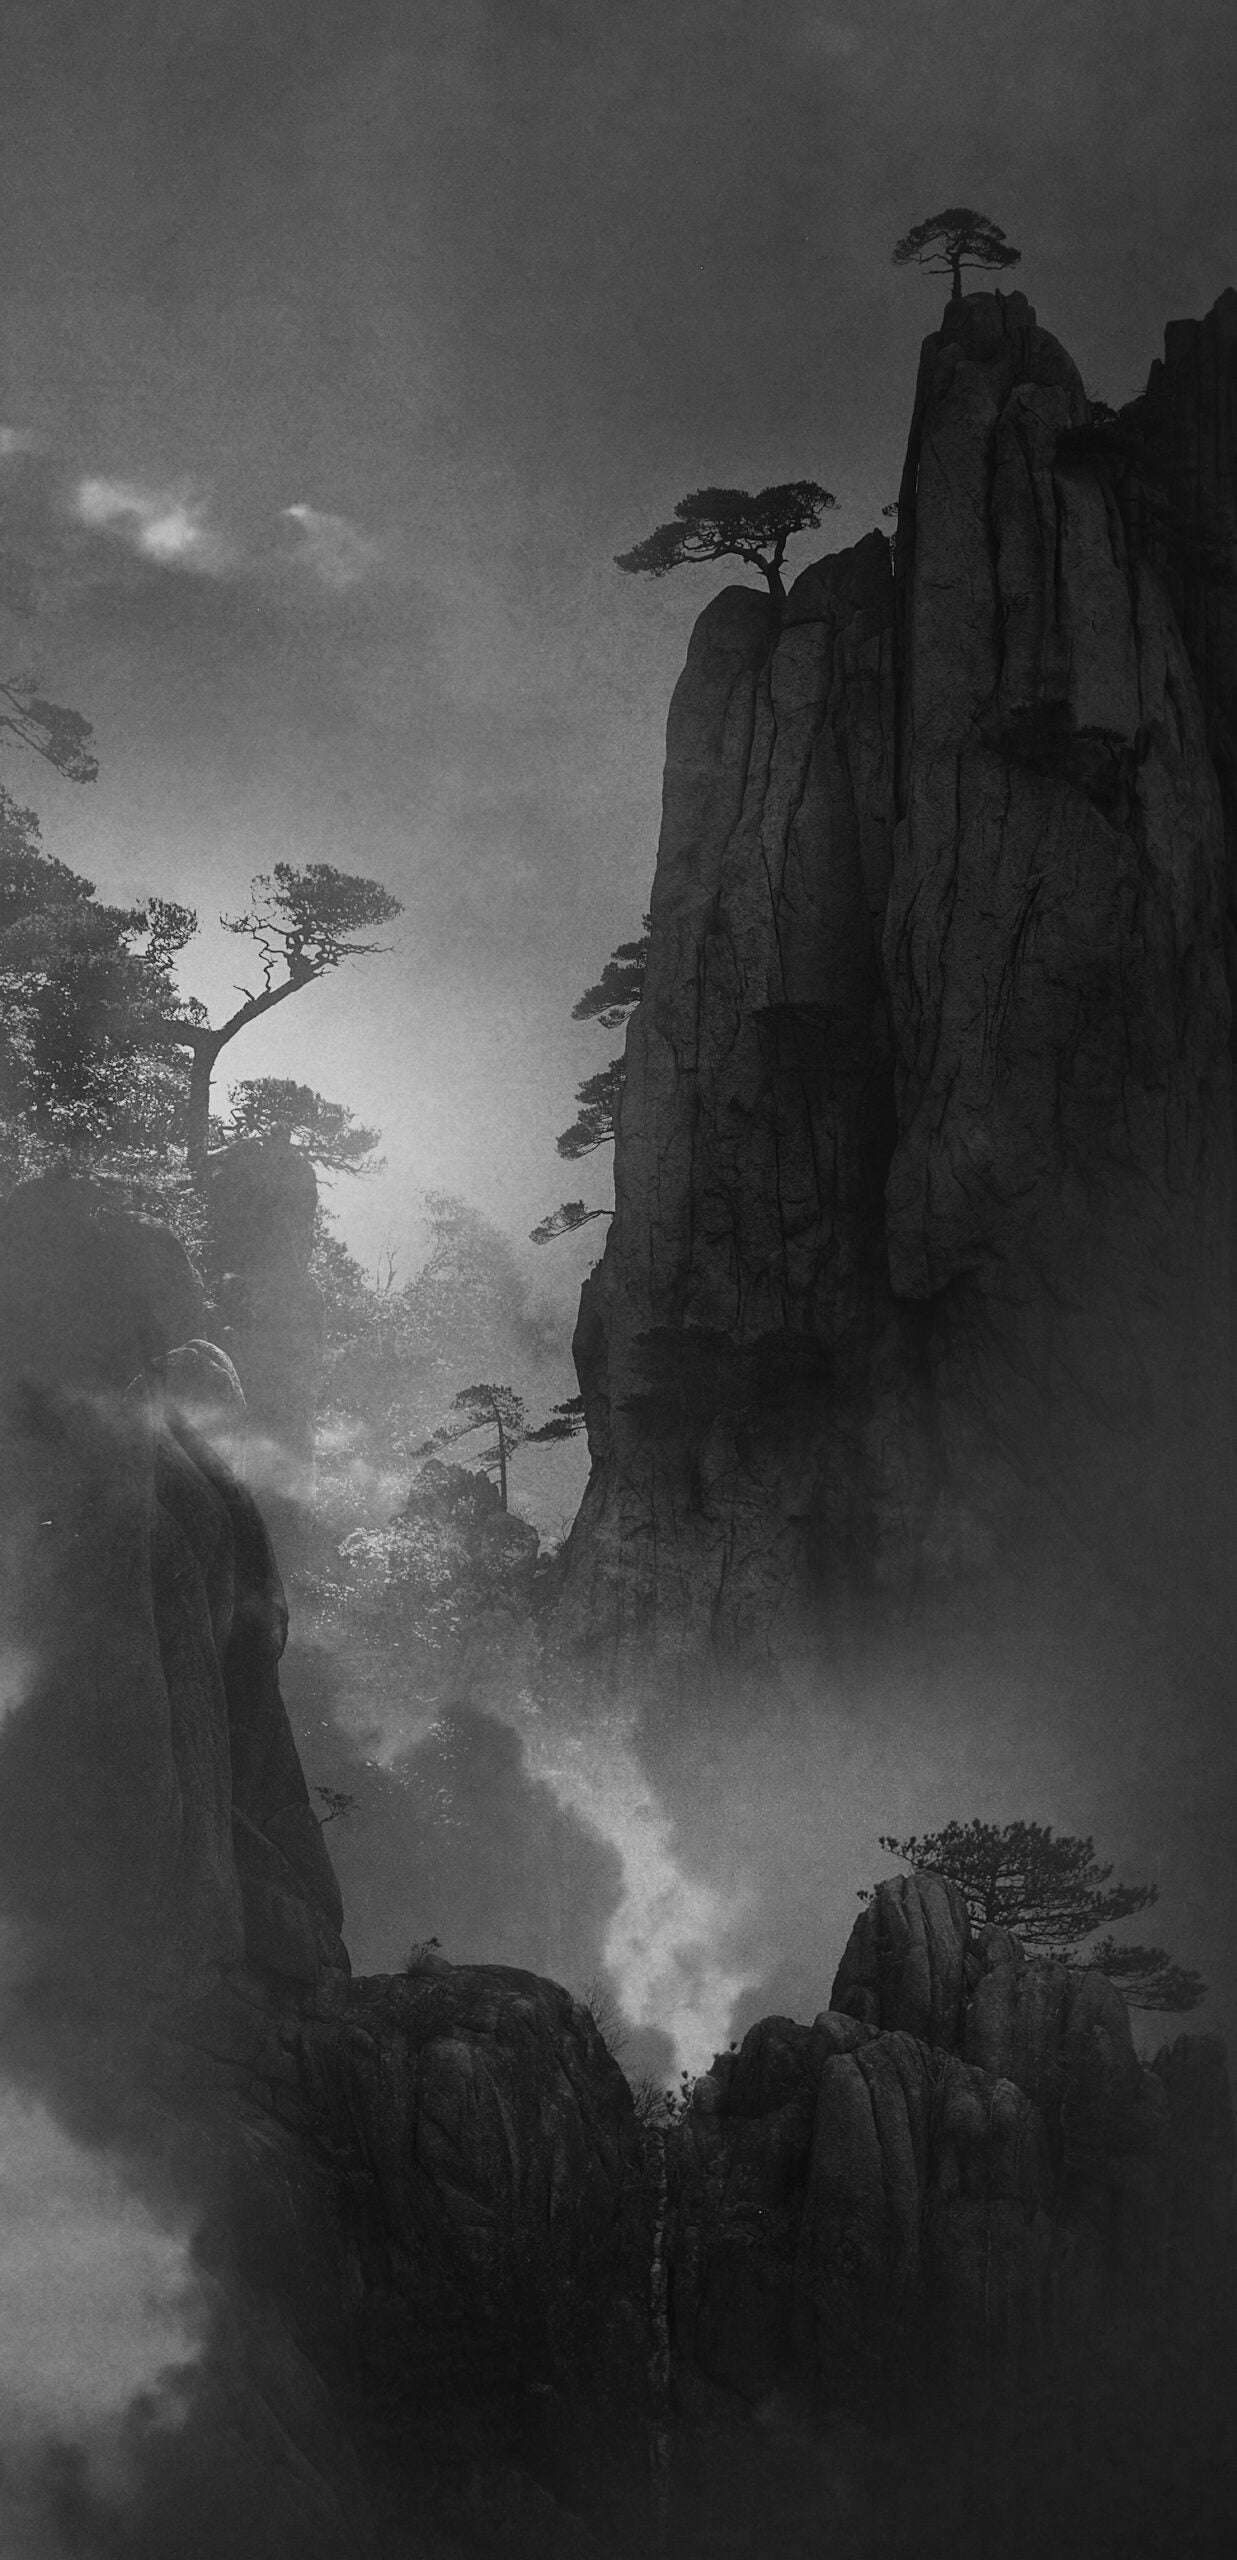 This black-and-white landscape photo was created by Chinese photographer Honghua Shi, who won in the Landscape/Nature category.